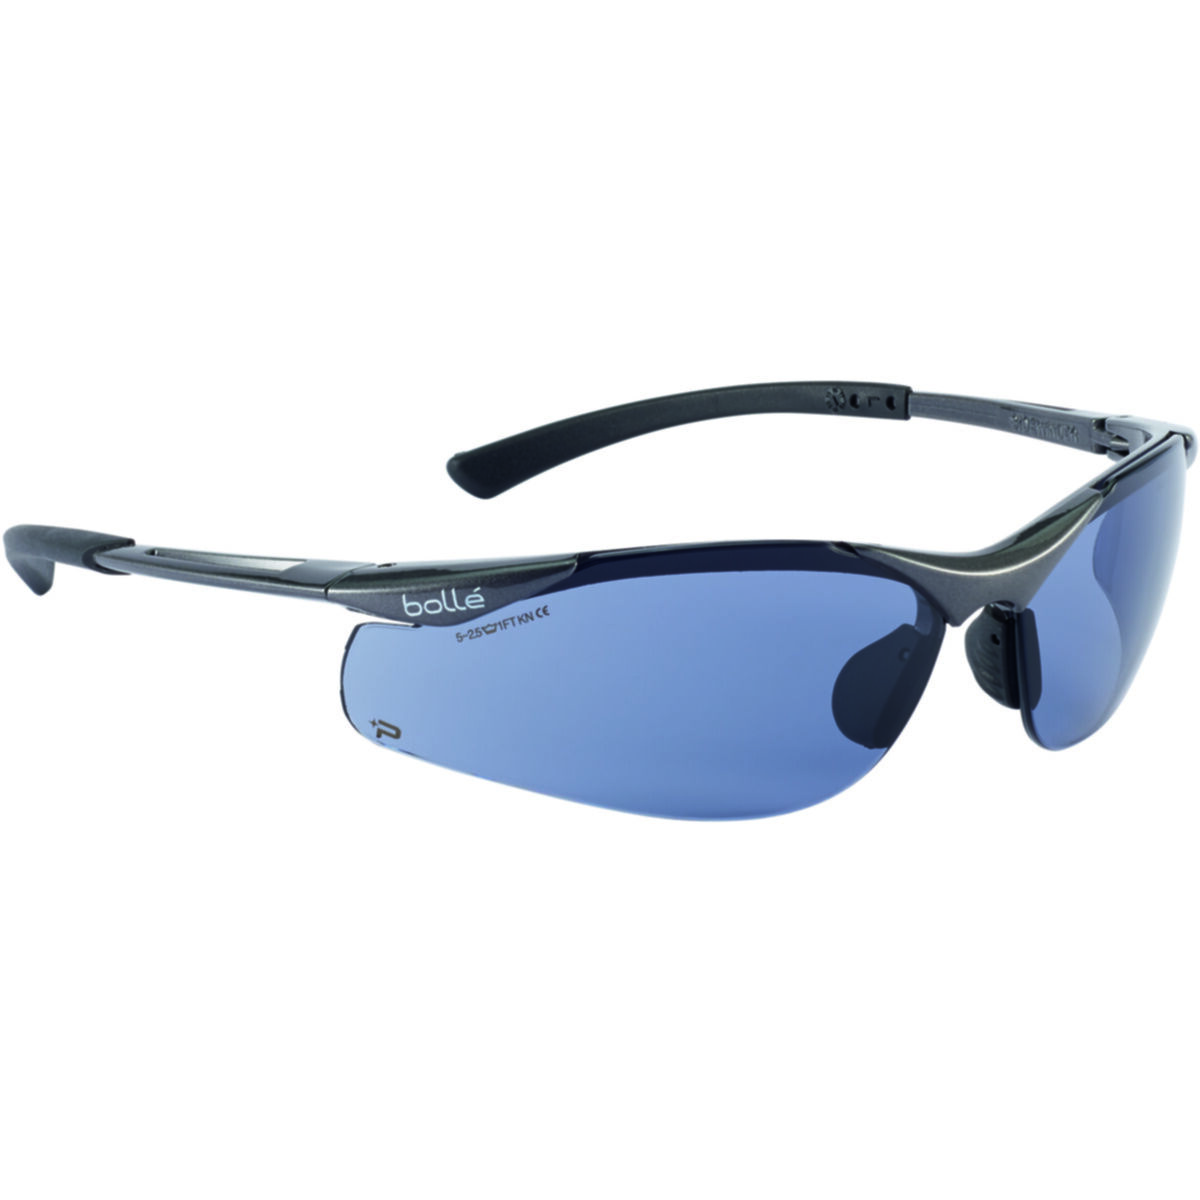 Bolle CONTPSF Contour Smoke Platinum Safety Glasses